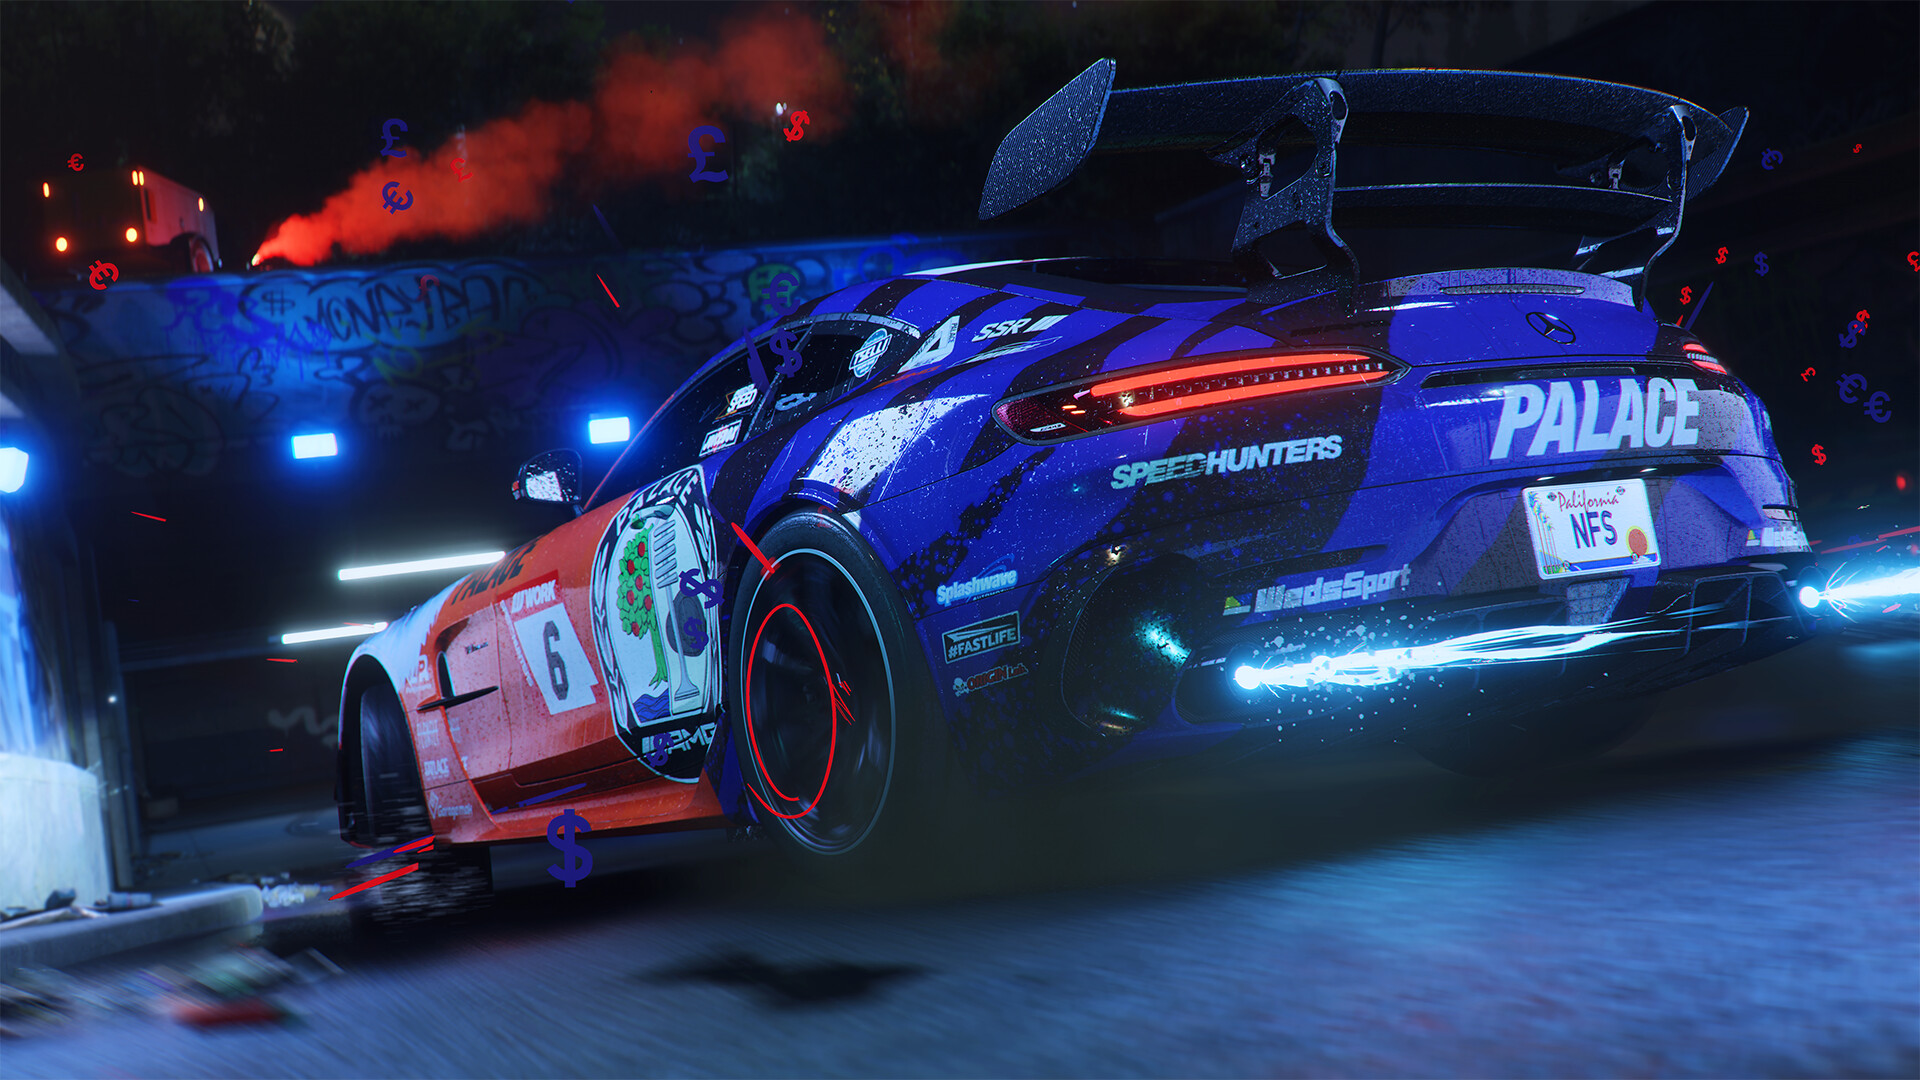 Need for Speed Races into the UP Video Theater